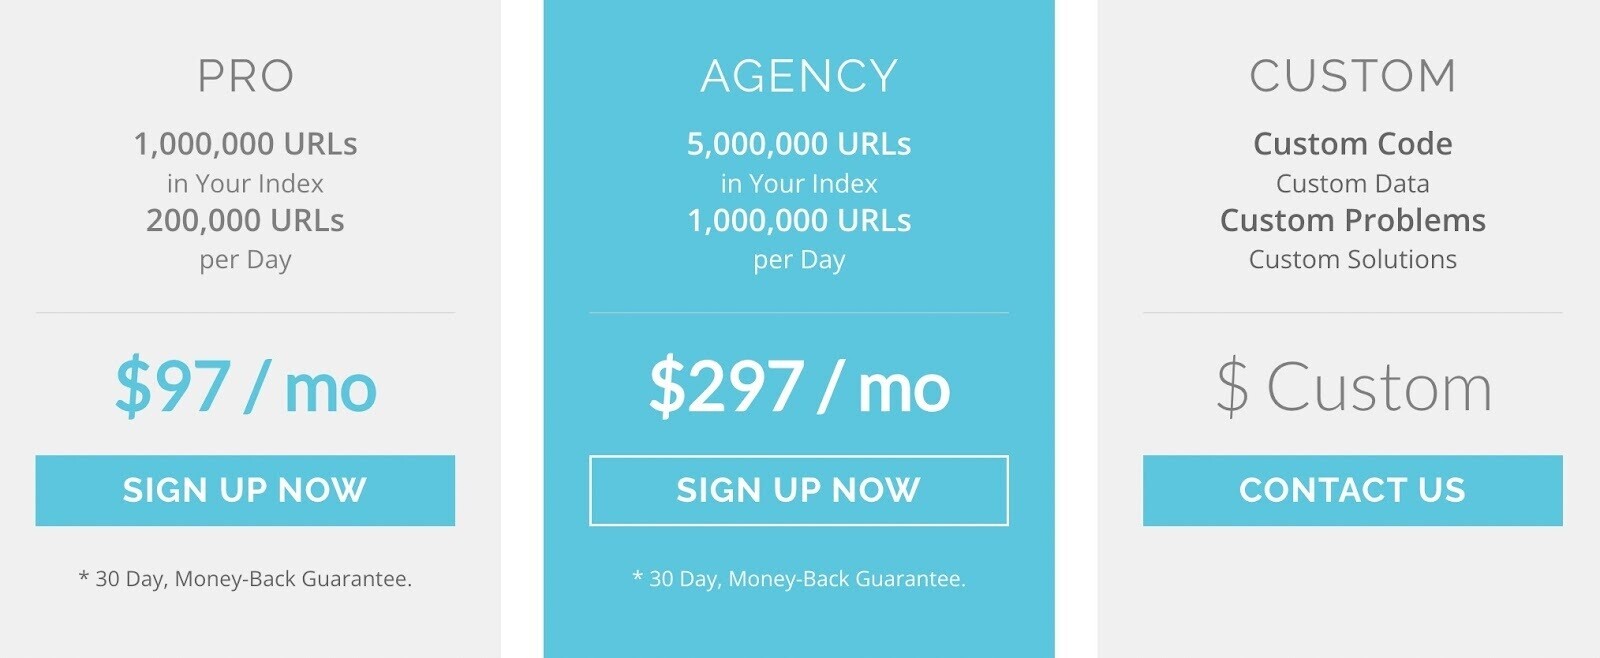 Ontolo’s pricing page showing prices for Pro, Agency and Custom plans